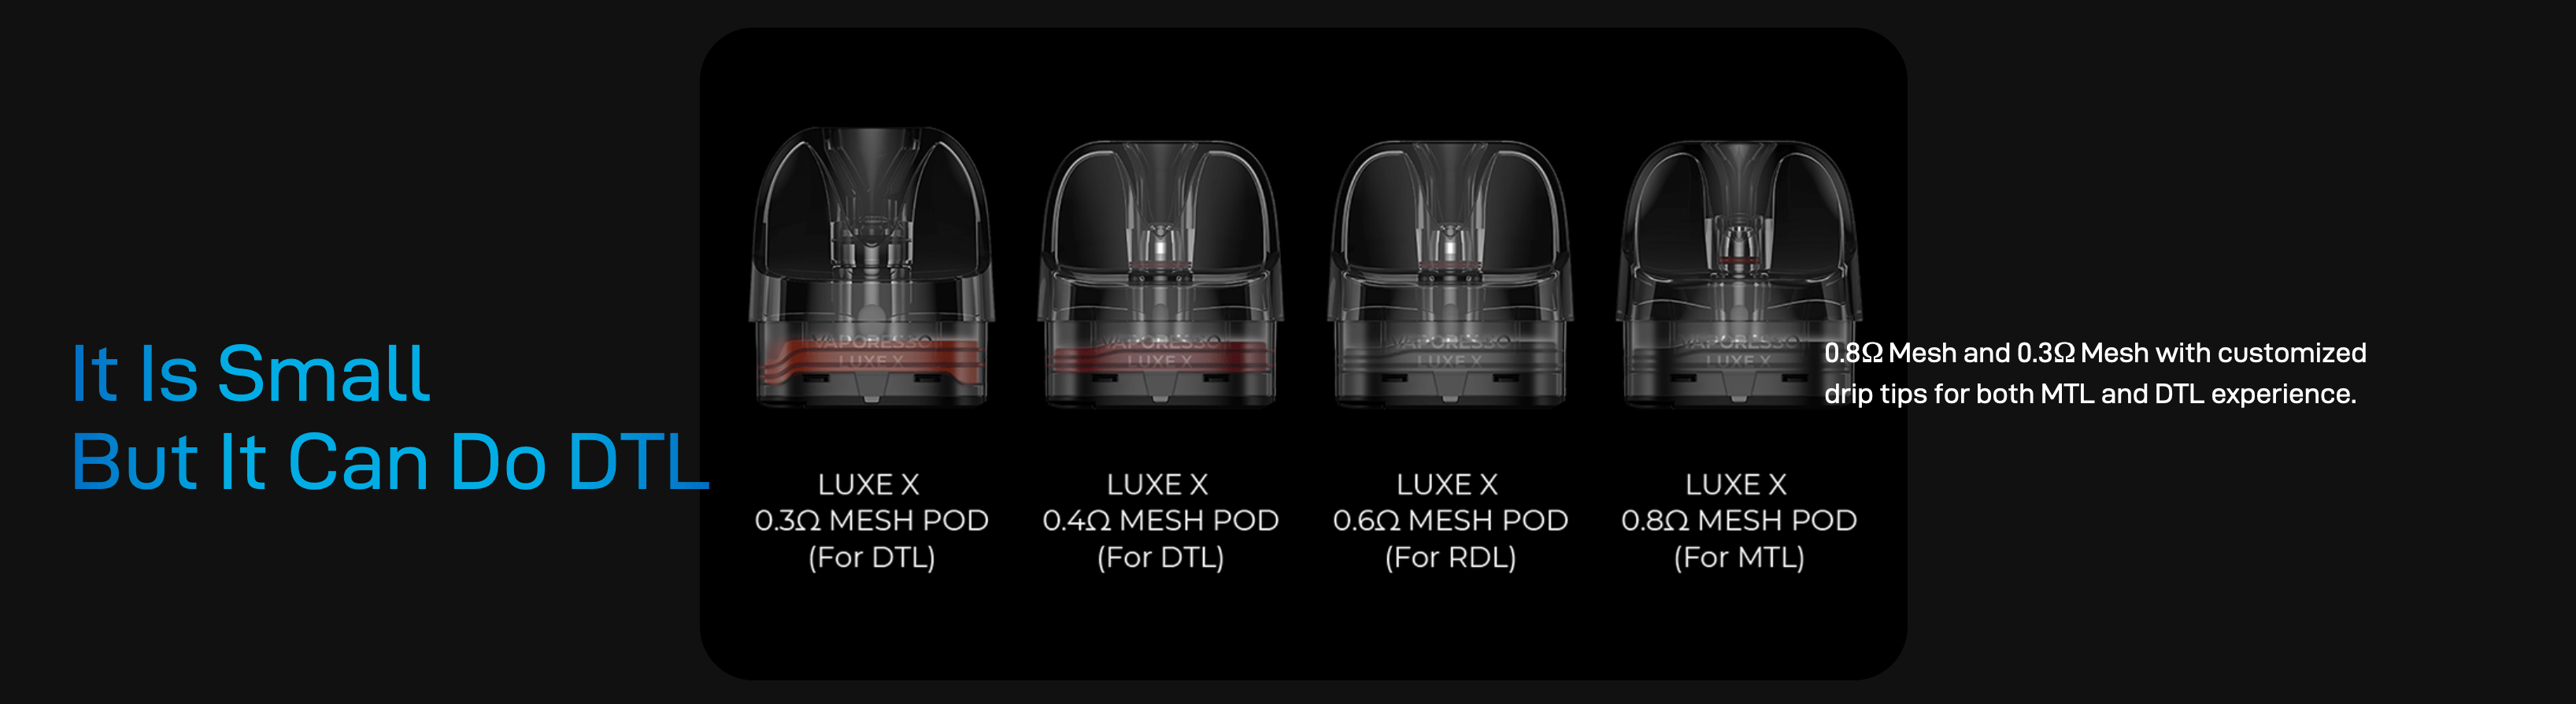 Vaporesso Luxe X Pods - Coil restistance options; 0.3, 0.4, 0.6 and 0.8ohm